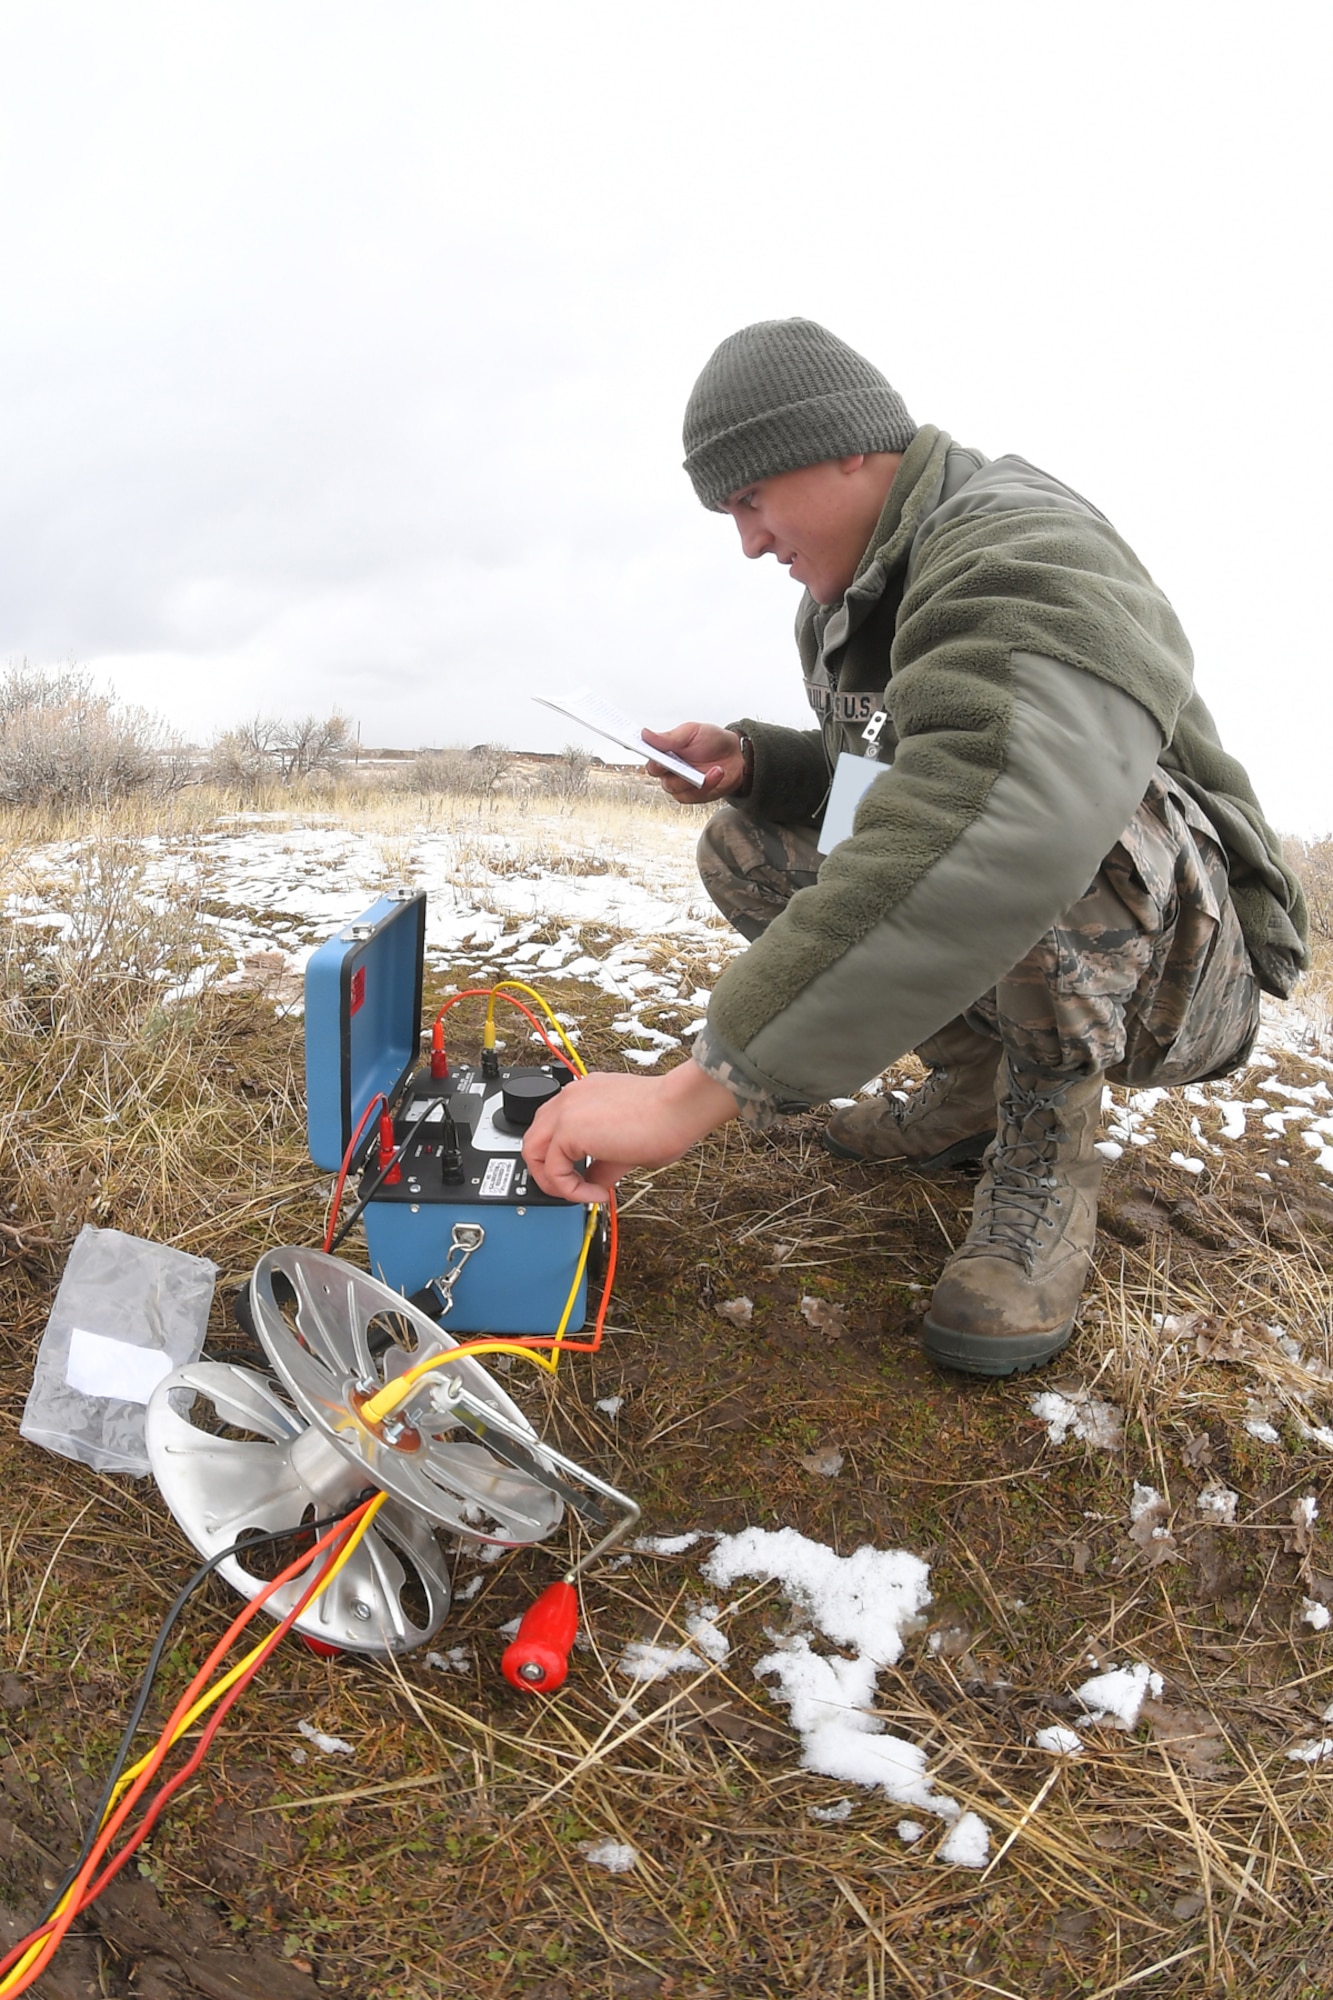 Airman 1st Class Thomas Juillerat, 729th Air Control Squadron, tests equipment Feb. 5, 2019, during a readiness exercise at Hill Air Force Base, Utah. The evolution was part of an exercise to mobilize and set up a deployed radar location and control reporting center. (U.S. Air Force photo by Todd Cromar)